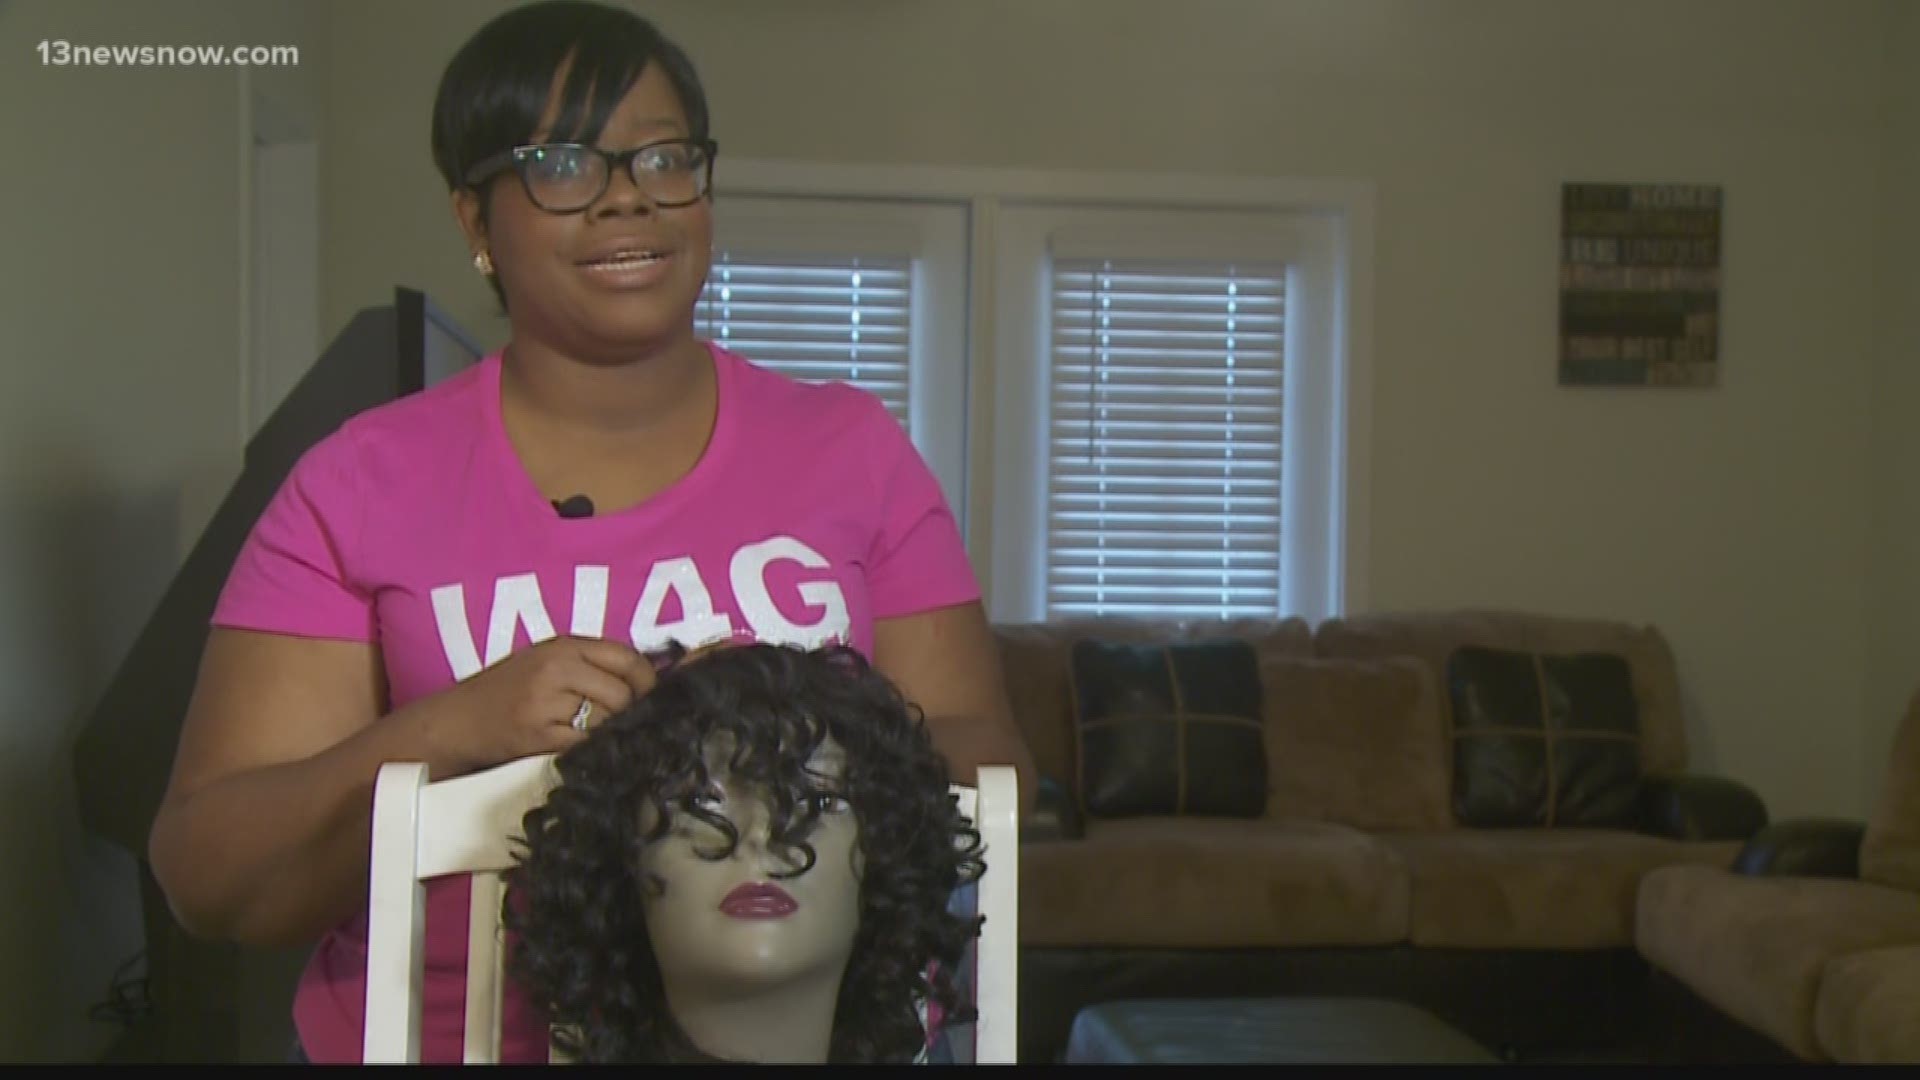 A local woman is making a difference through wig design after deciding to give back to those who have lost their hair due to illness.